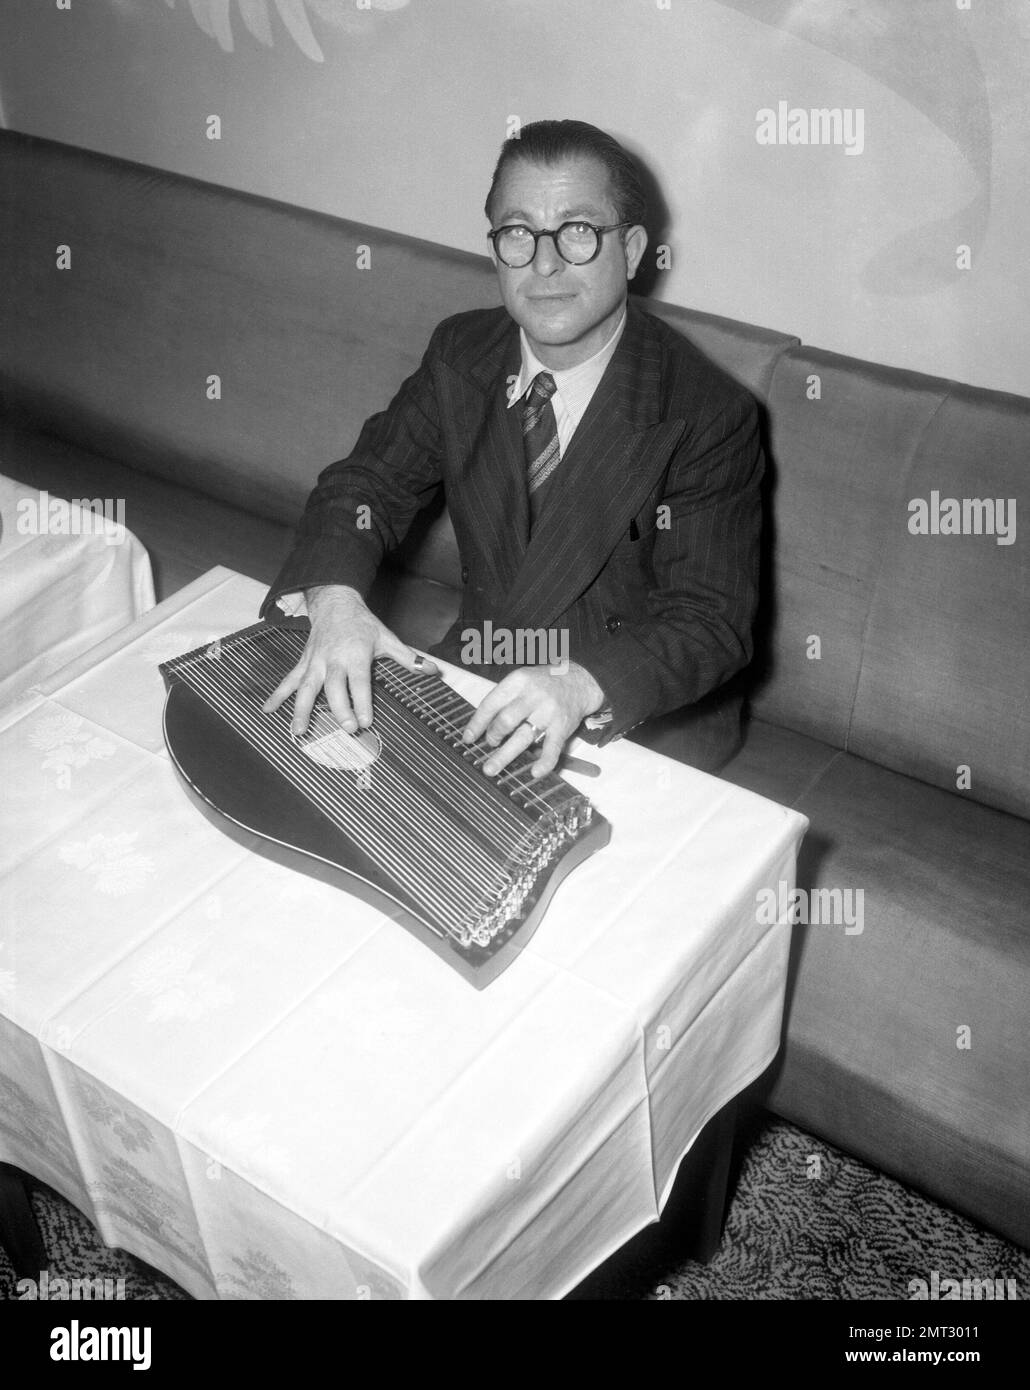 Shortly after his arrival in London, Anton Karas plays at an Empress Club press reception on Nov. 14, 1949. (AP Photo/Dennis-Lee Royle) Stock Photo